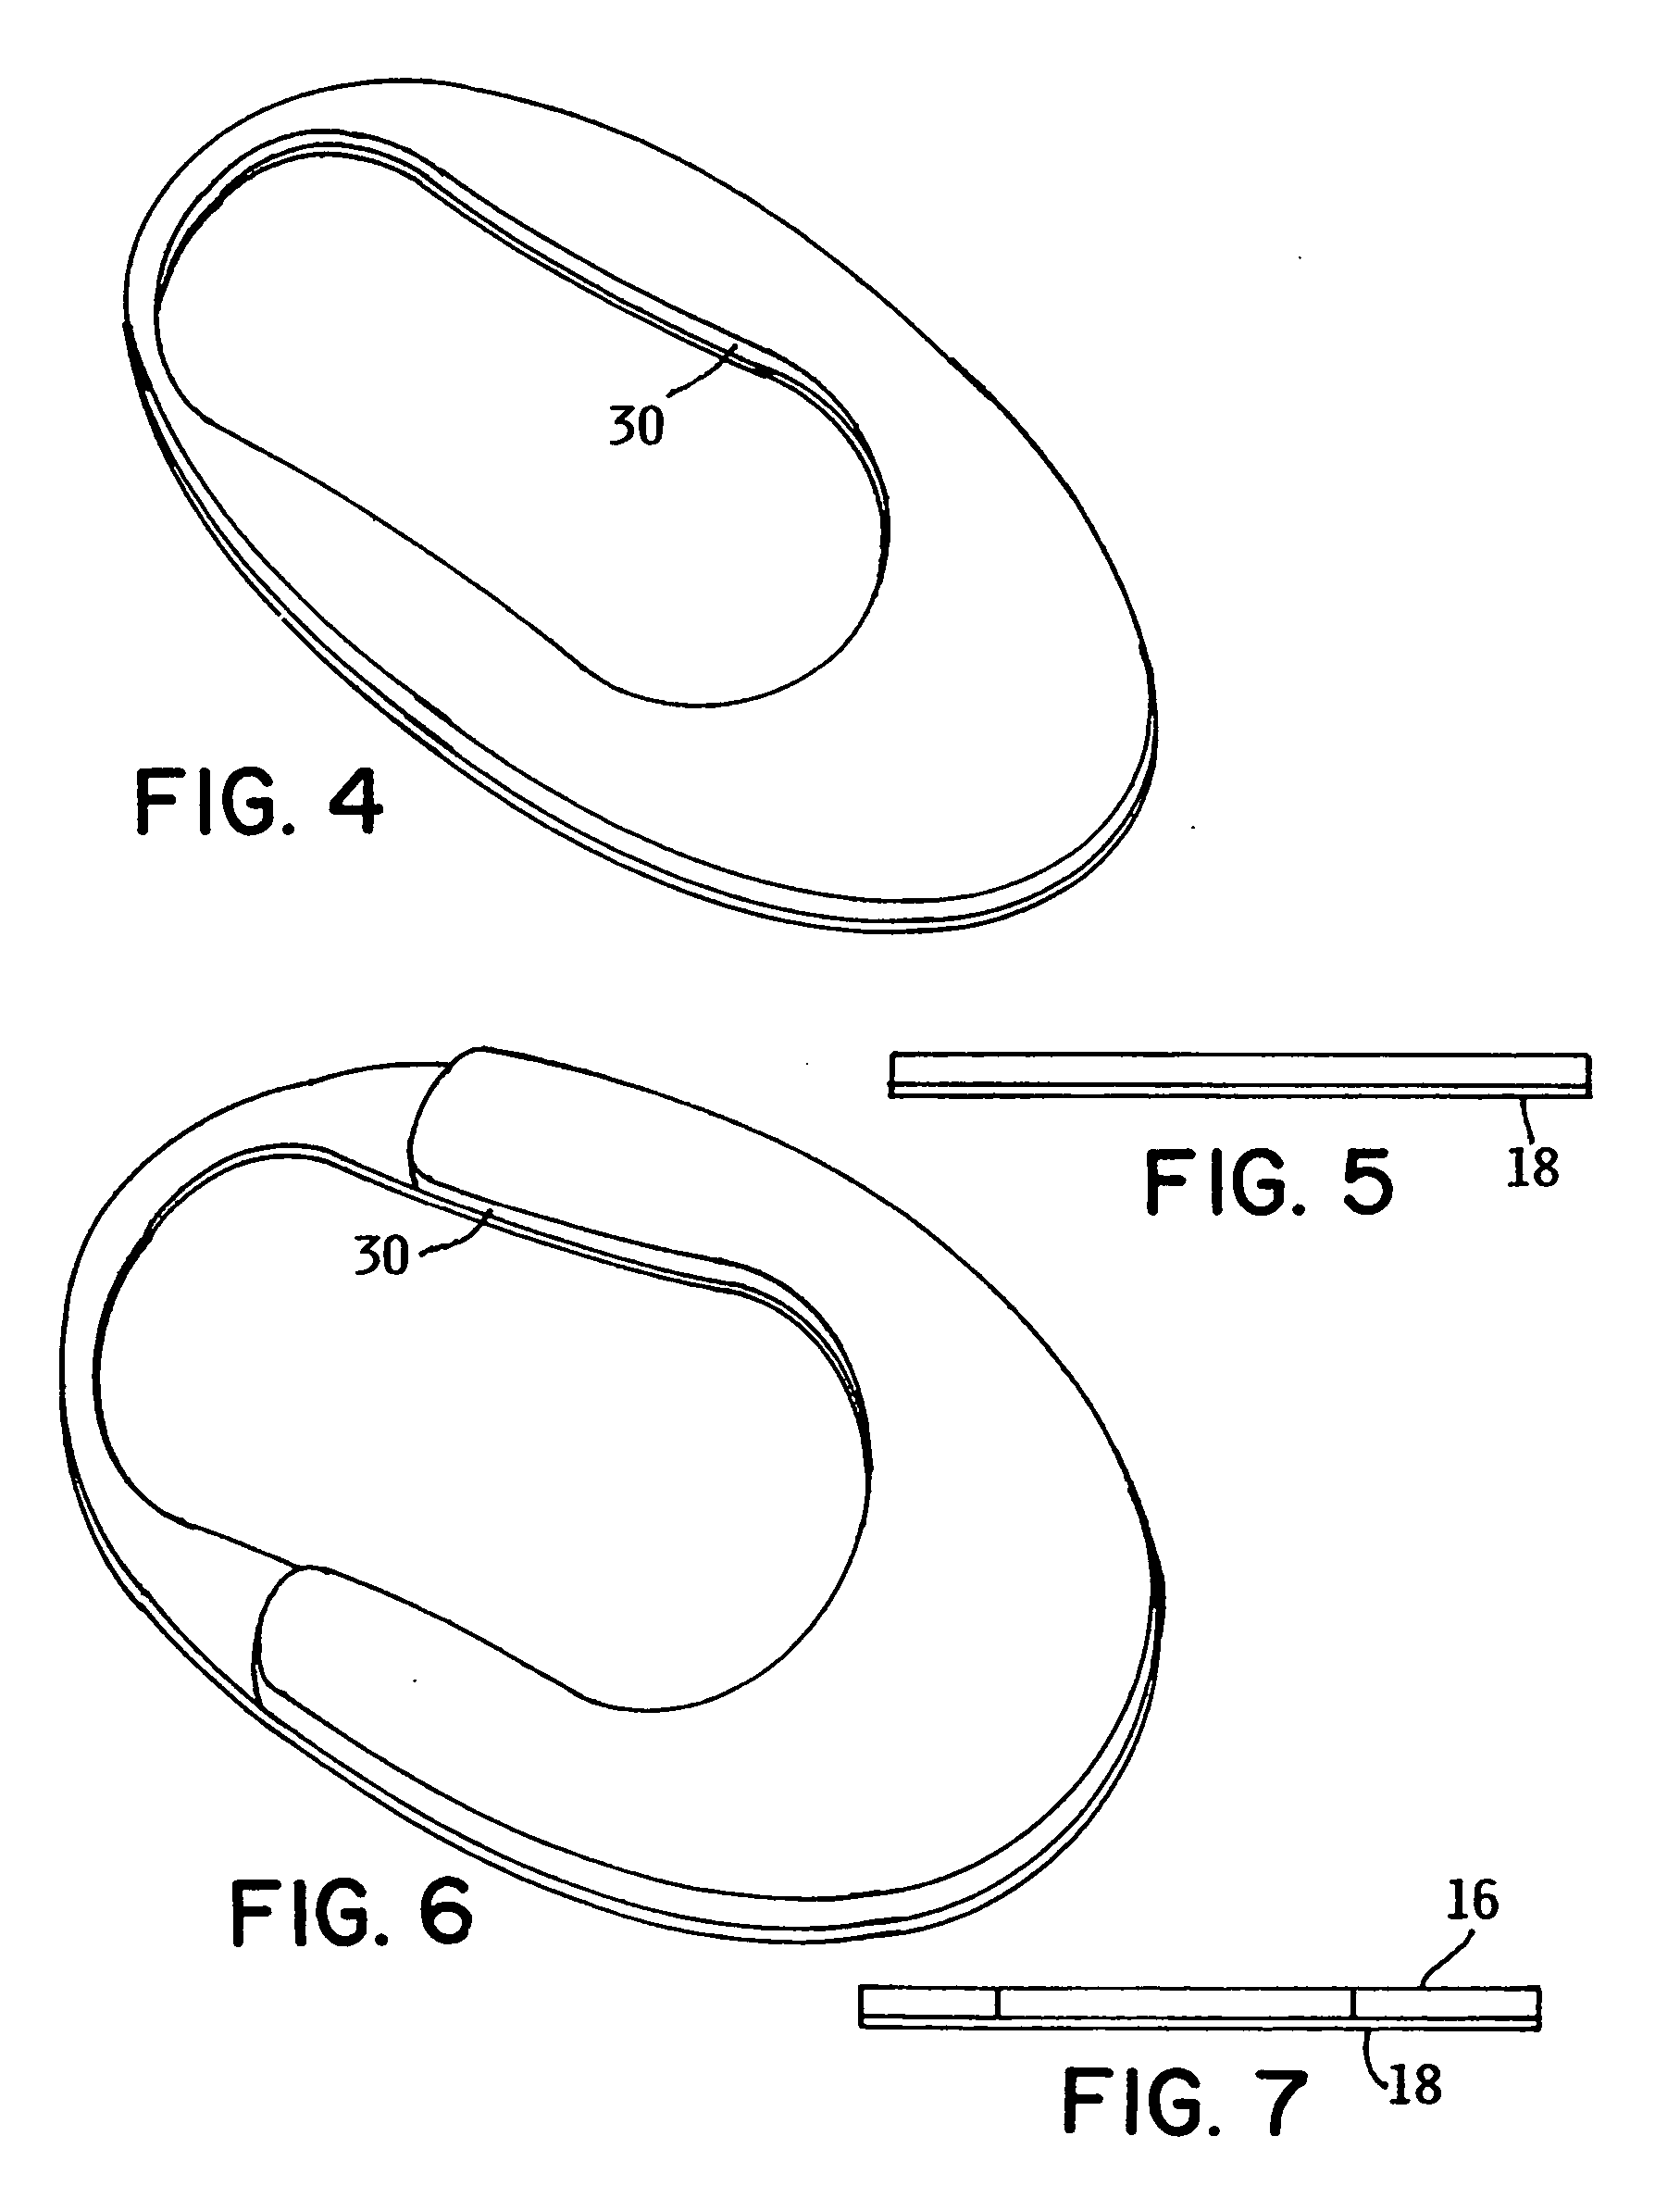 Movable hand/wrist support for use with a computer mouse